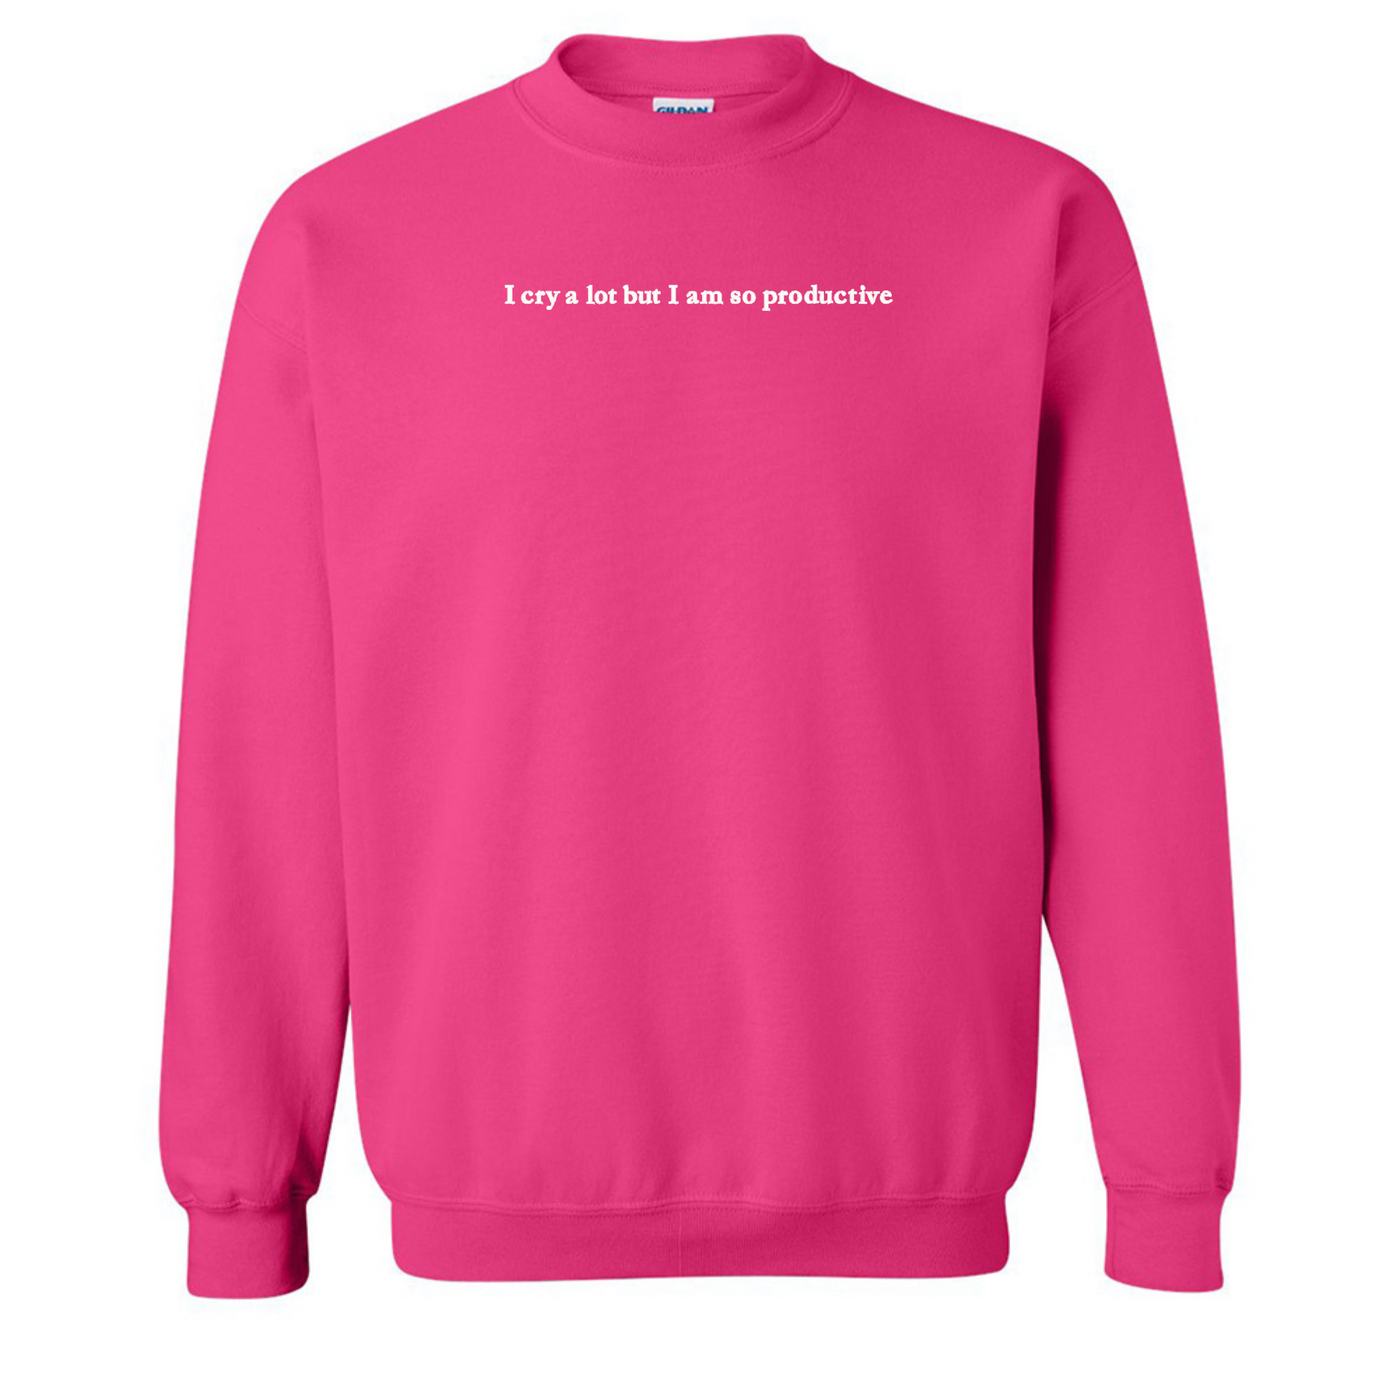 Embroidered 'I Cry A Lot But' Crewneck Sweatshirt